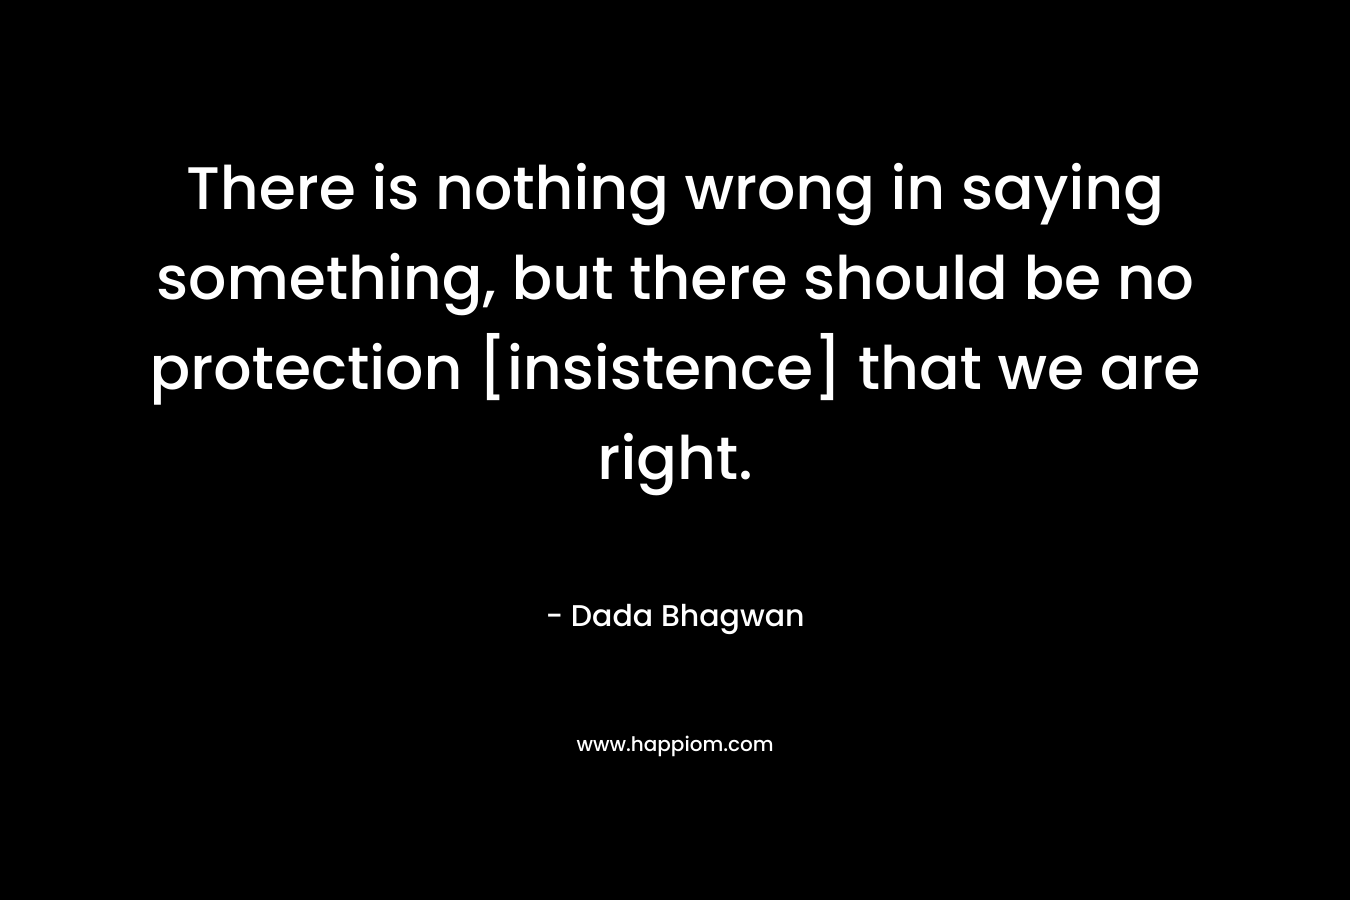 There is nothing wrong in saying something, but there should be no protection [insistence] that we are right.